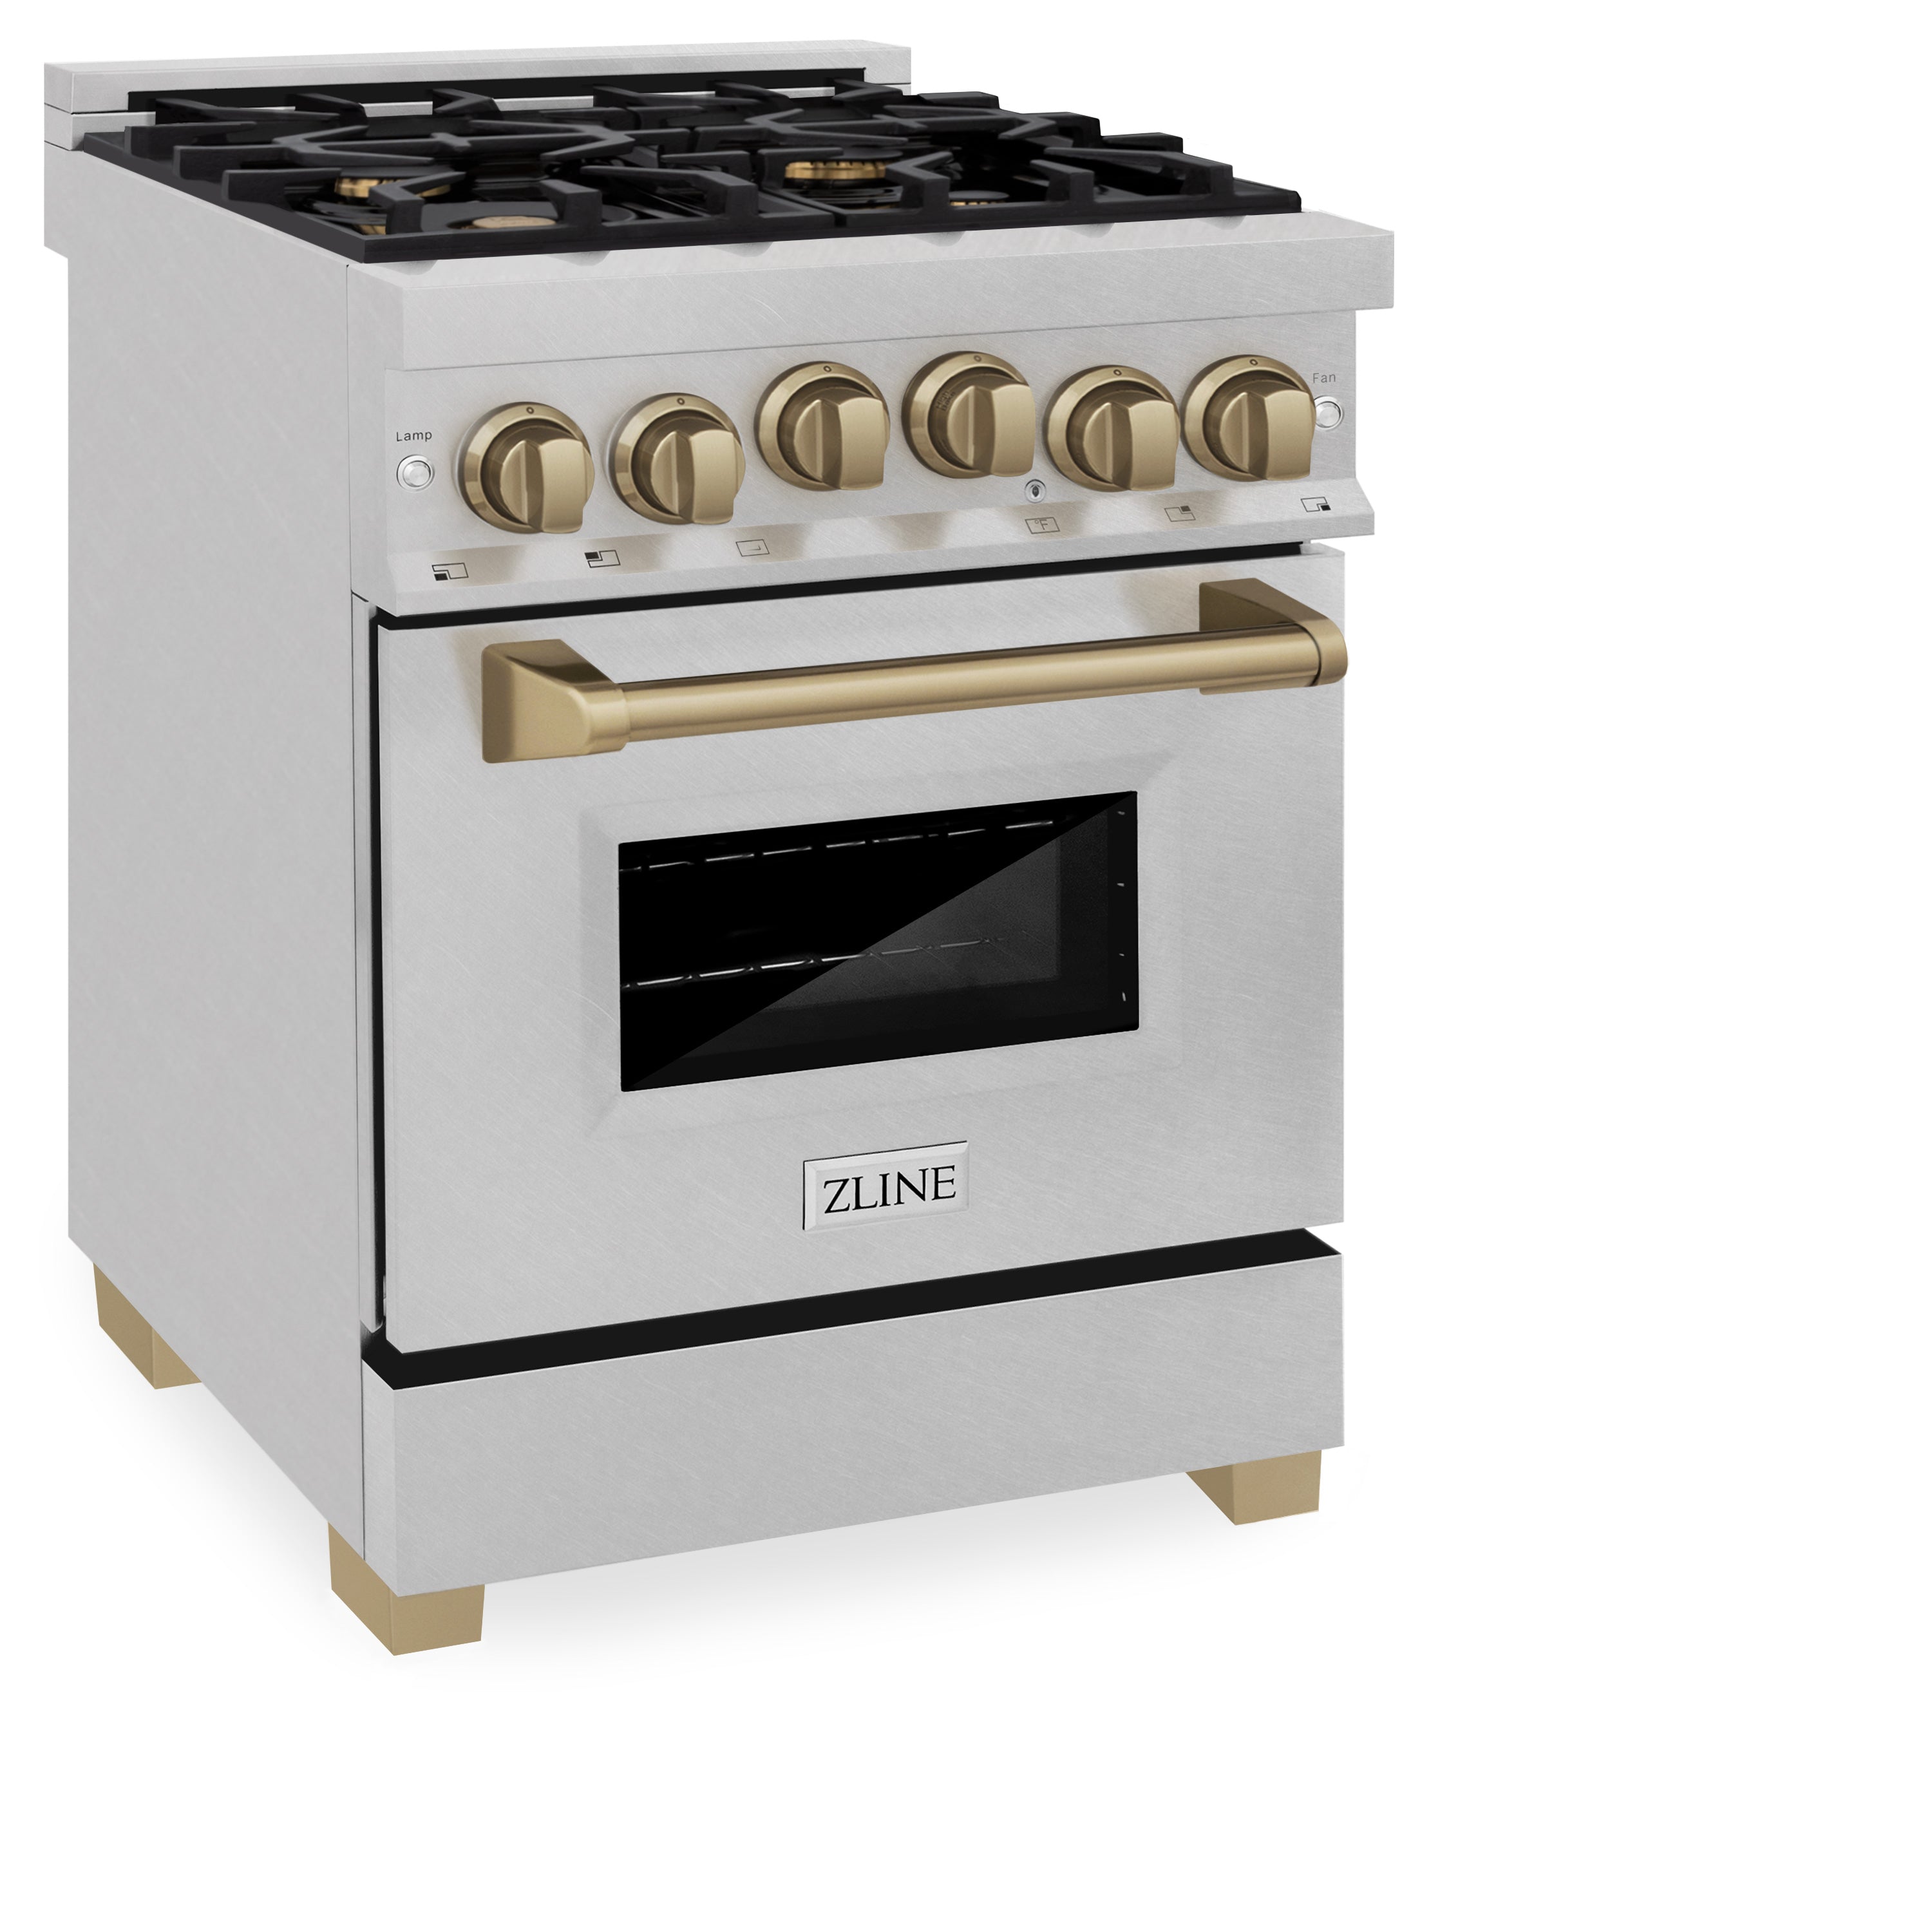 ZLINE Autograph Edition 24" 2.8 cu. ft. Range with Gas Stove and Gas Oven in Fingerprint Resistant Stainless Steel with Champagne Bronze Accents (RGSZ-SN-24-CB)